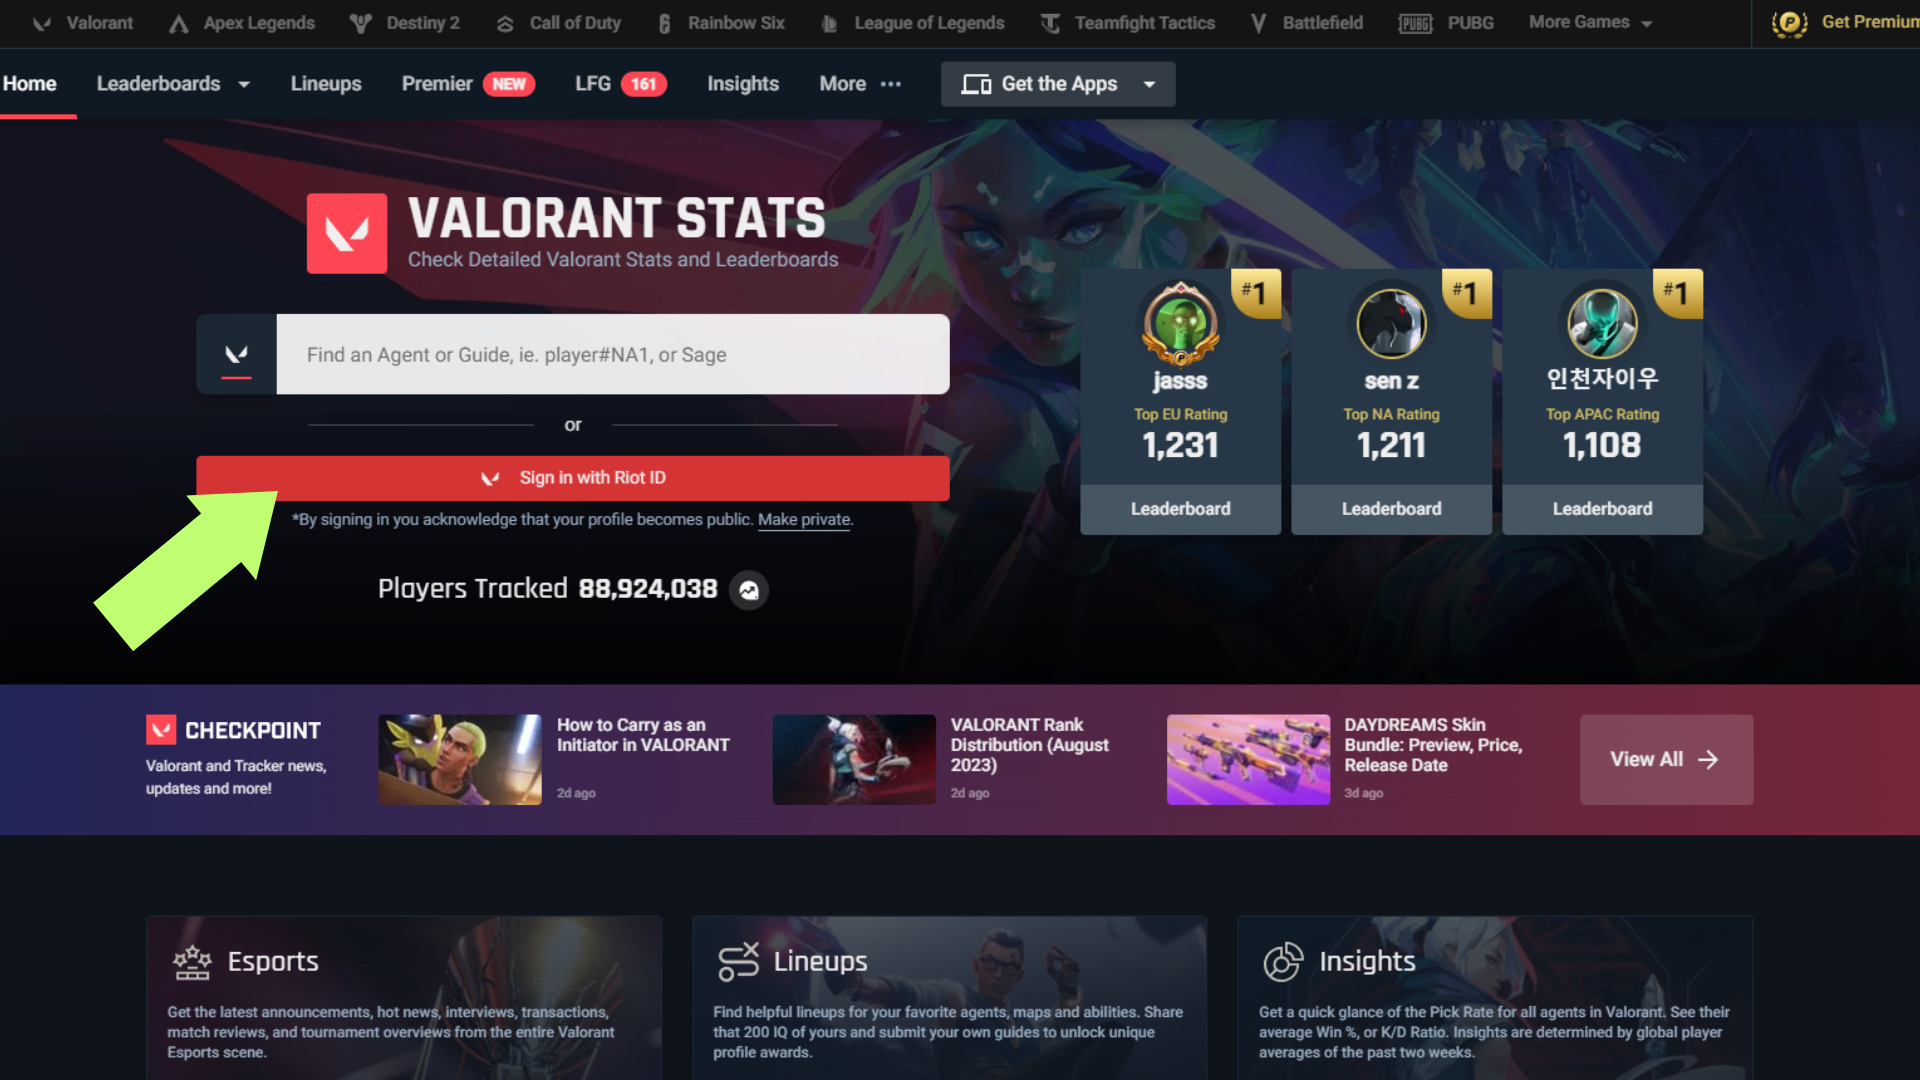 Sign in with your Riot ID to make your valorant profile public. 